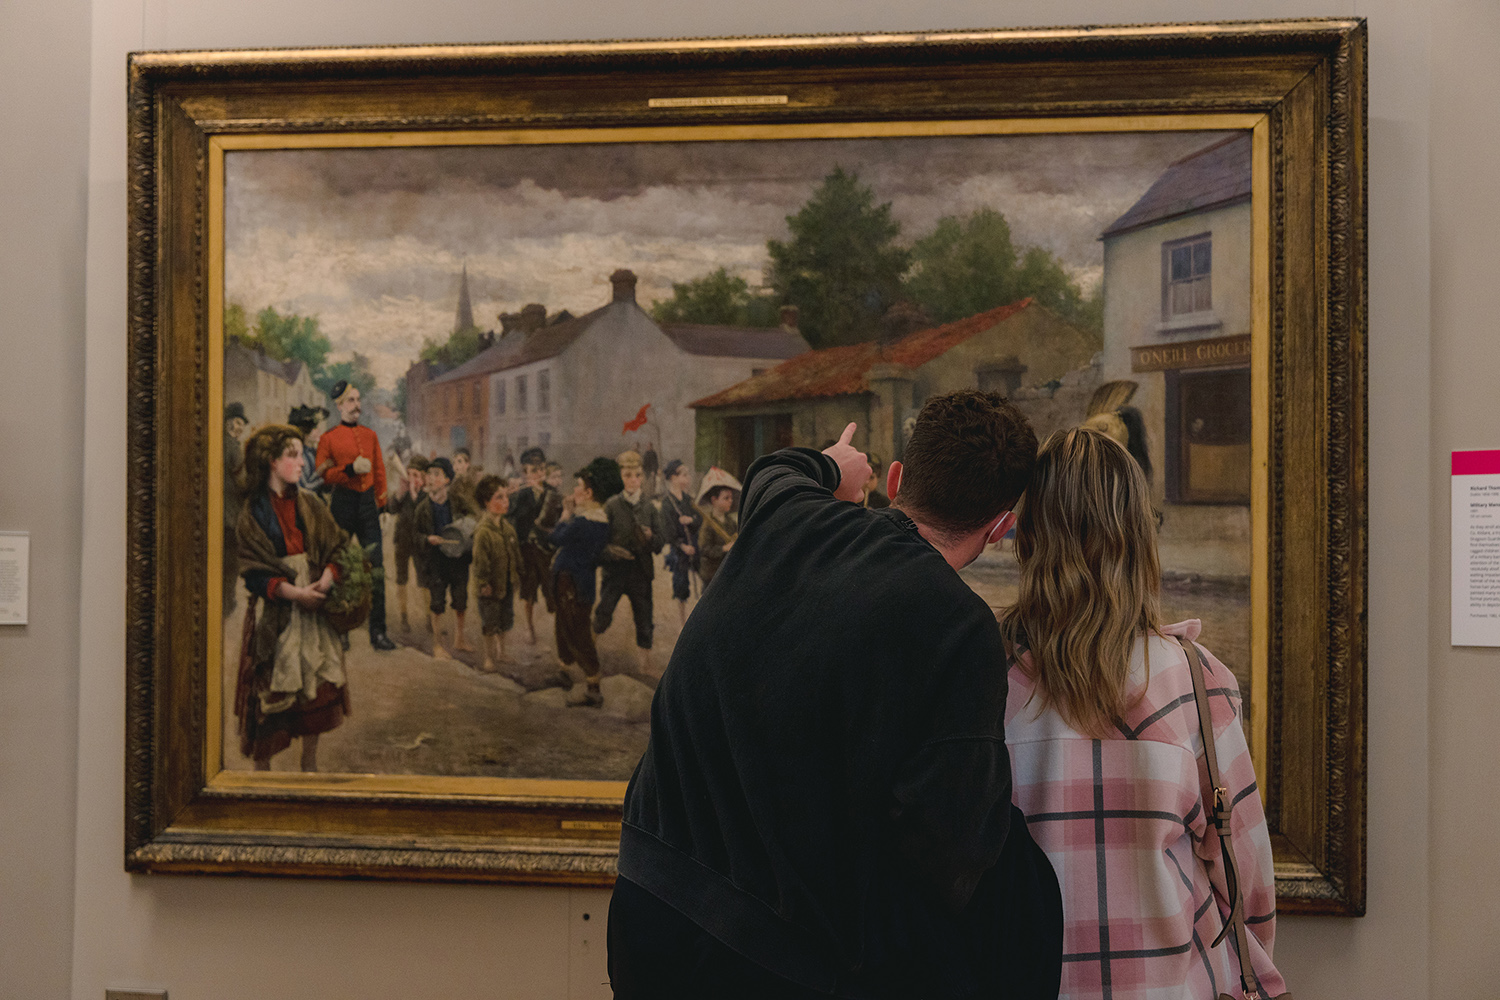 A photograph showing a man and woman standing looking at a large oil painting. Their heads are close together and the man is pointing at something in the painting.